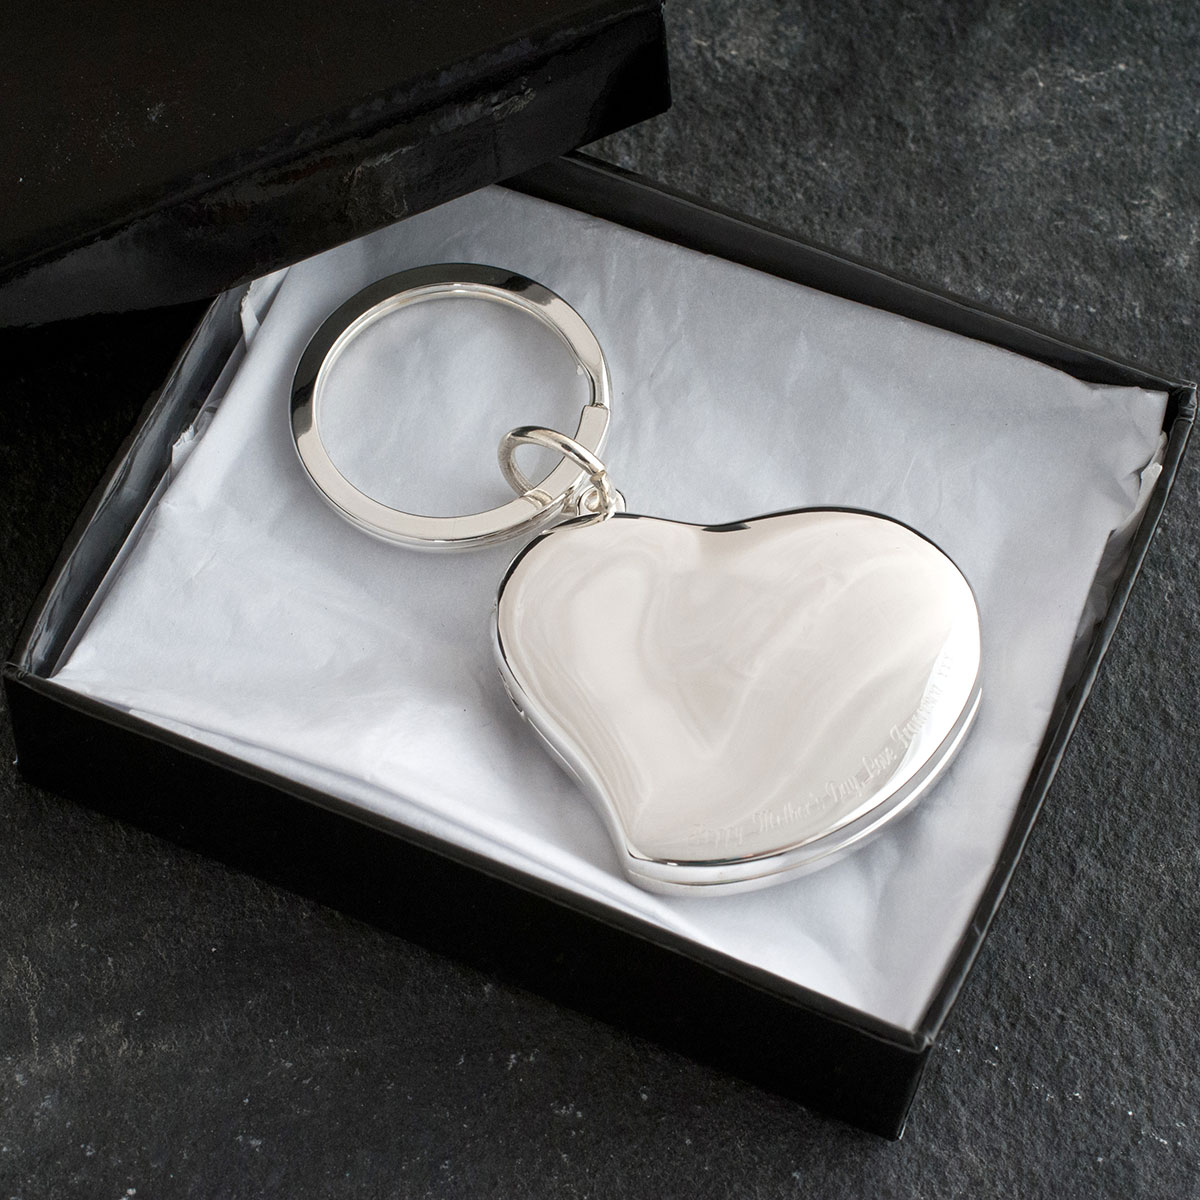 Engraved Mother's Day Heart Photo Keyring